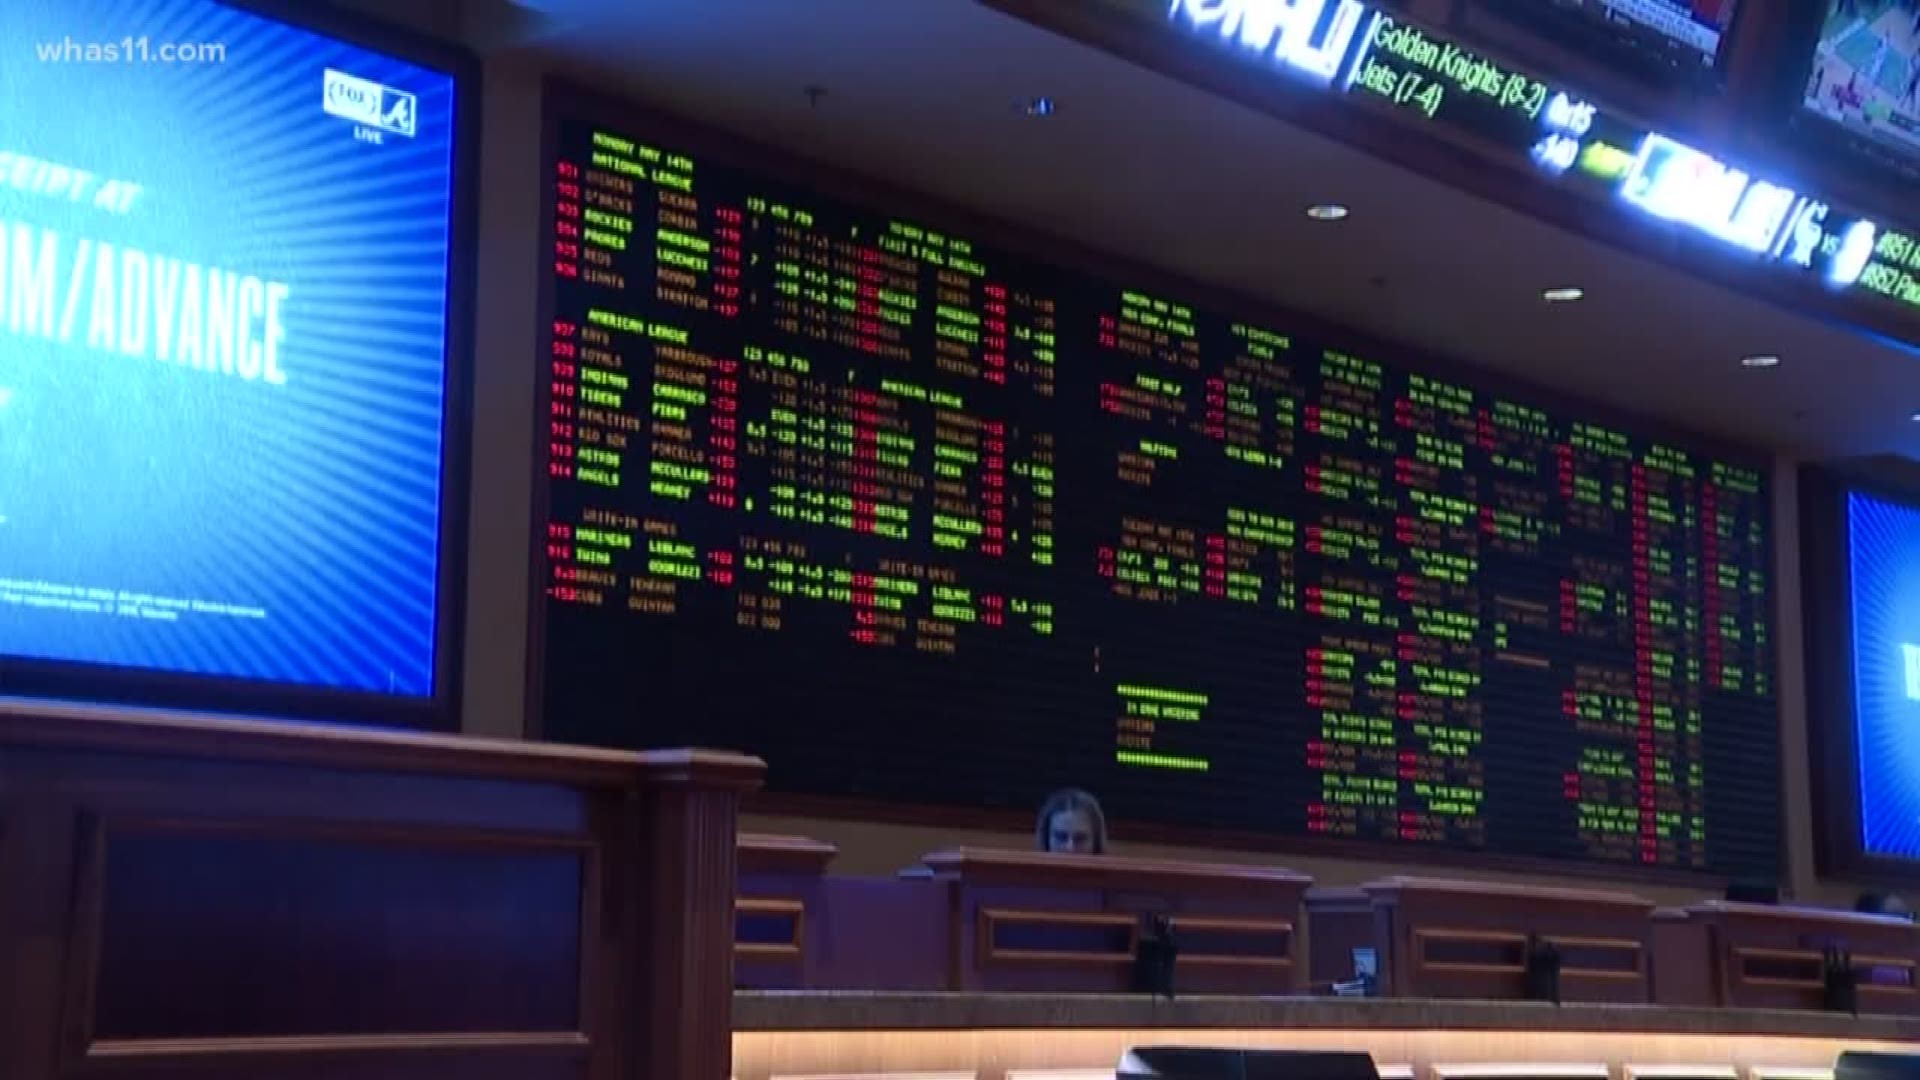 Indiana is going after more betting dollars, and Kentucky will feel the impact.